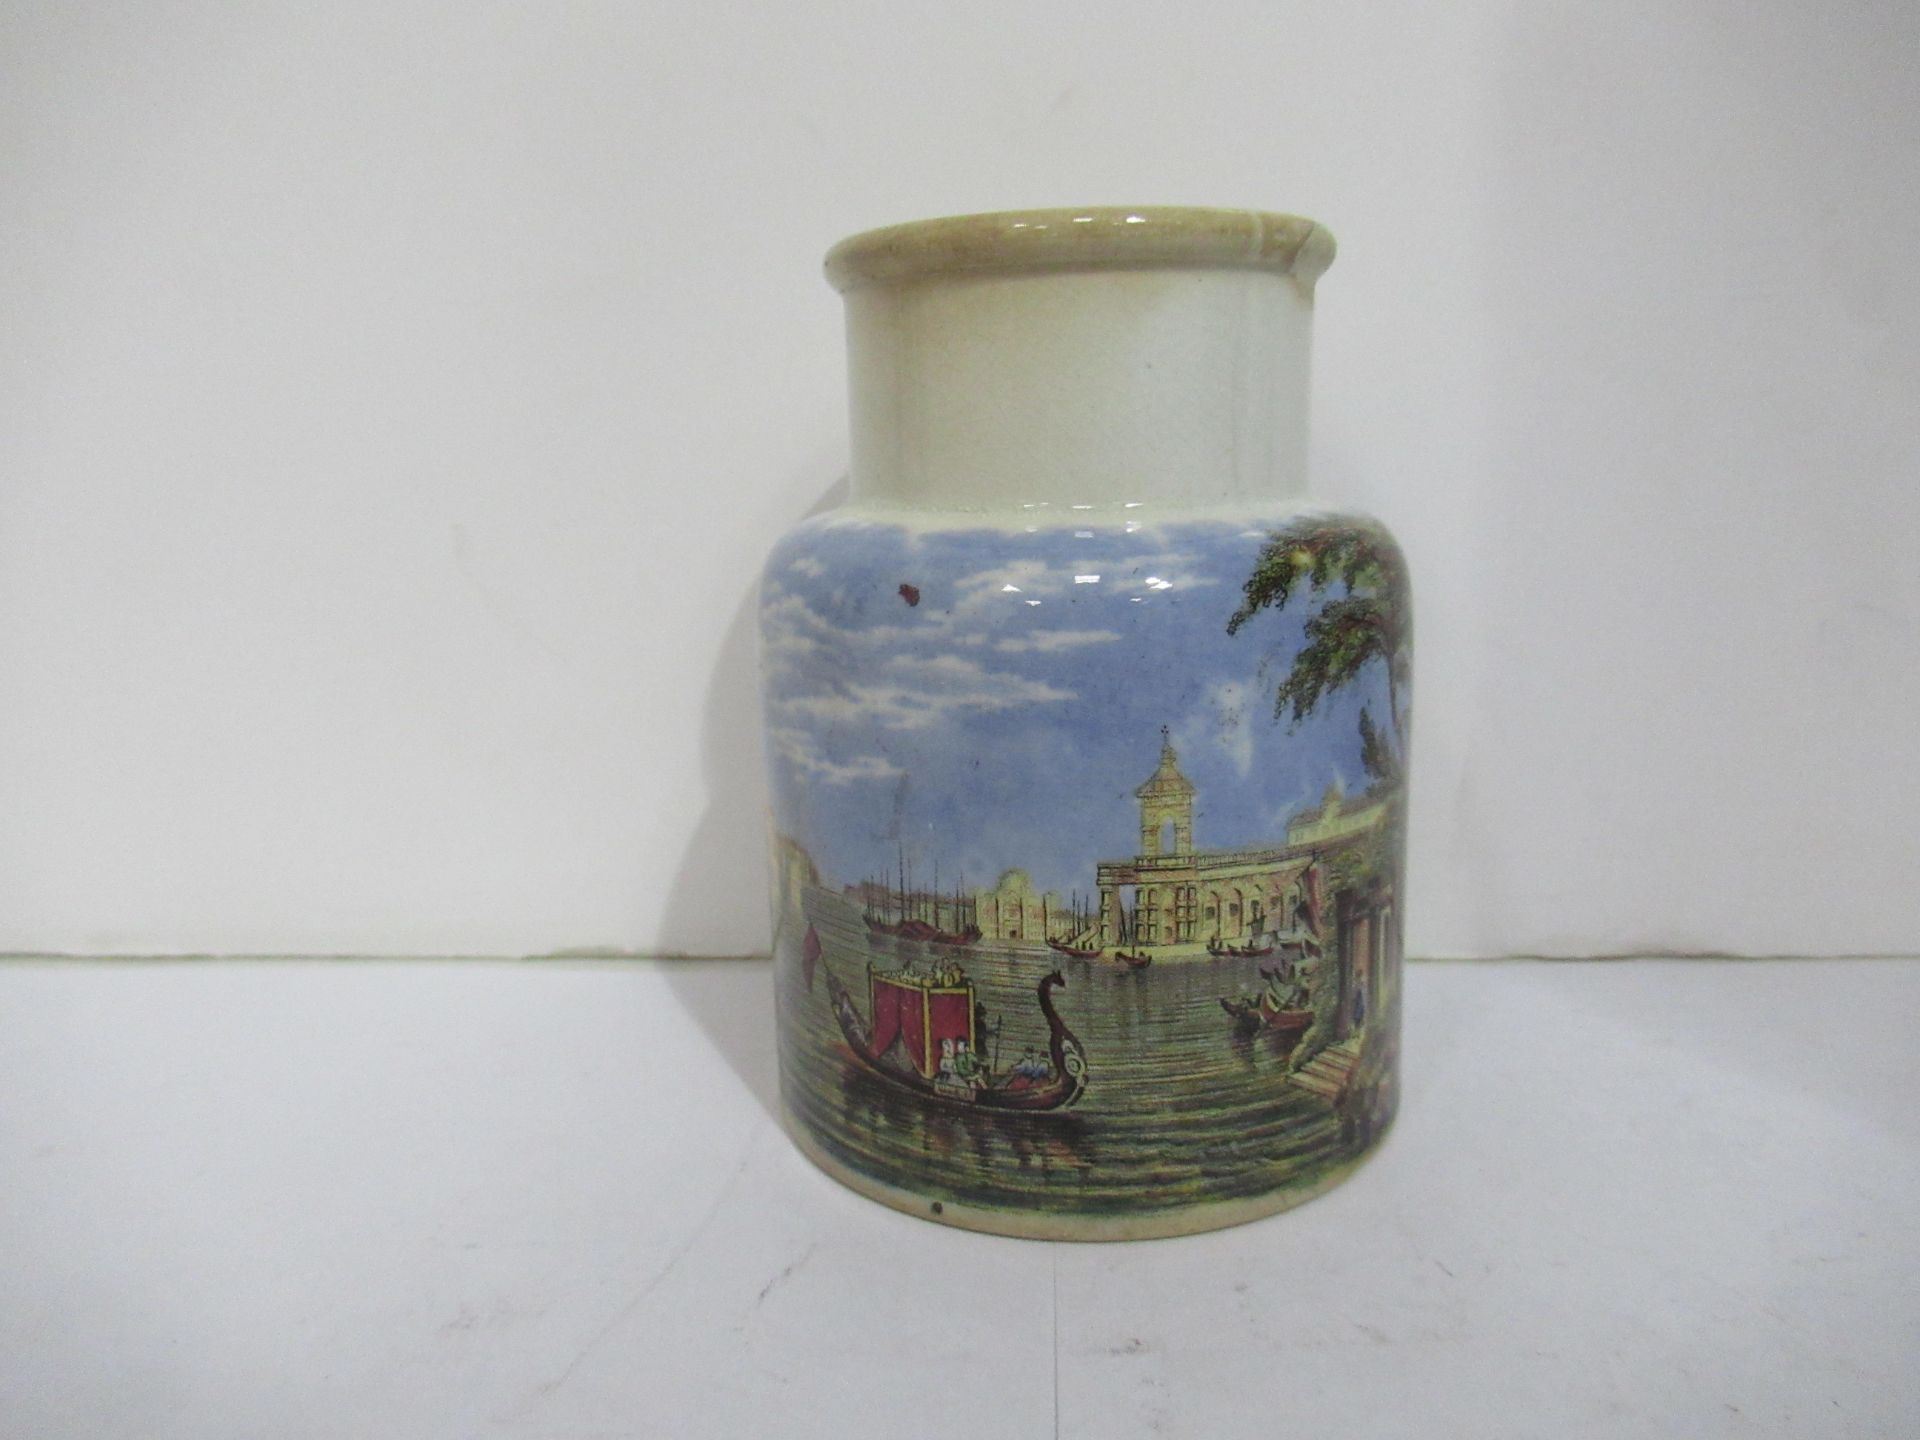 6x Prattware painted jars including one depicting Venice - Image 31 of 42